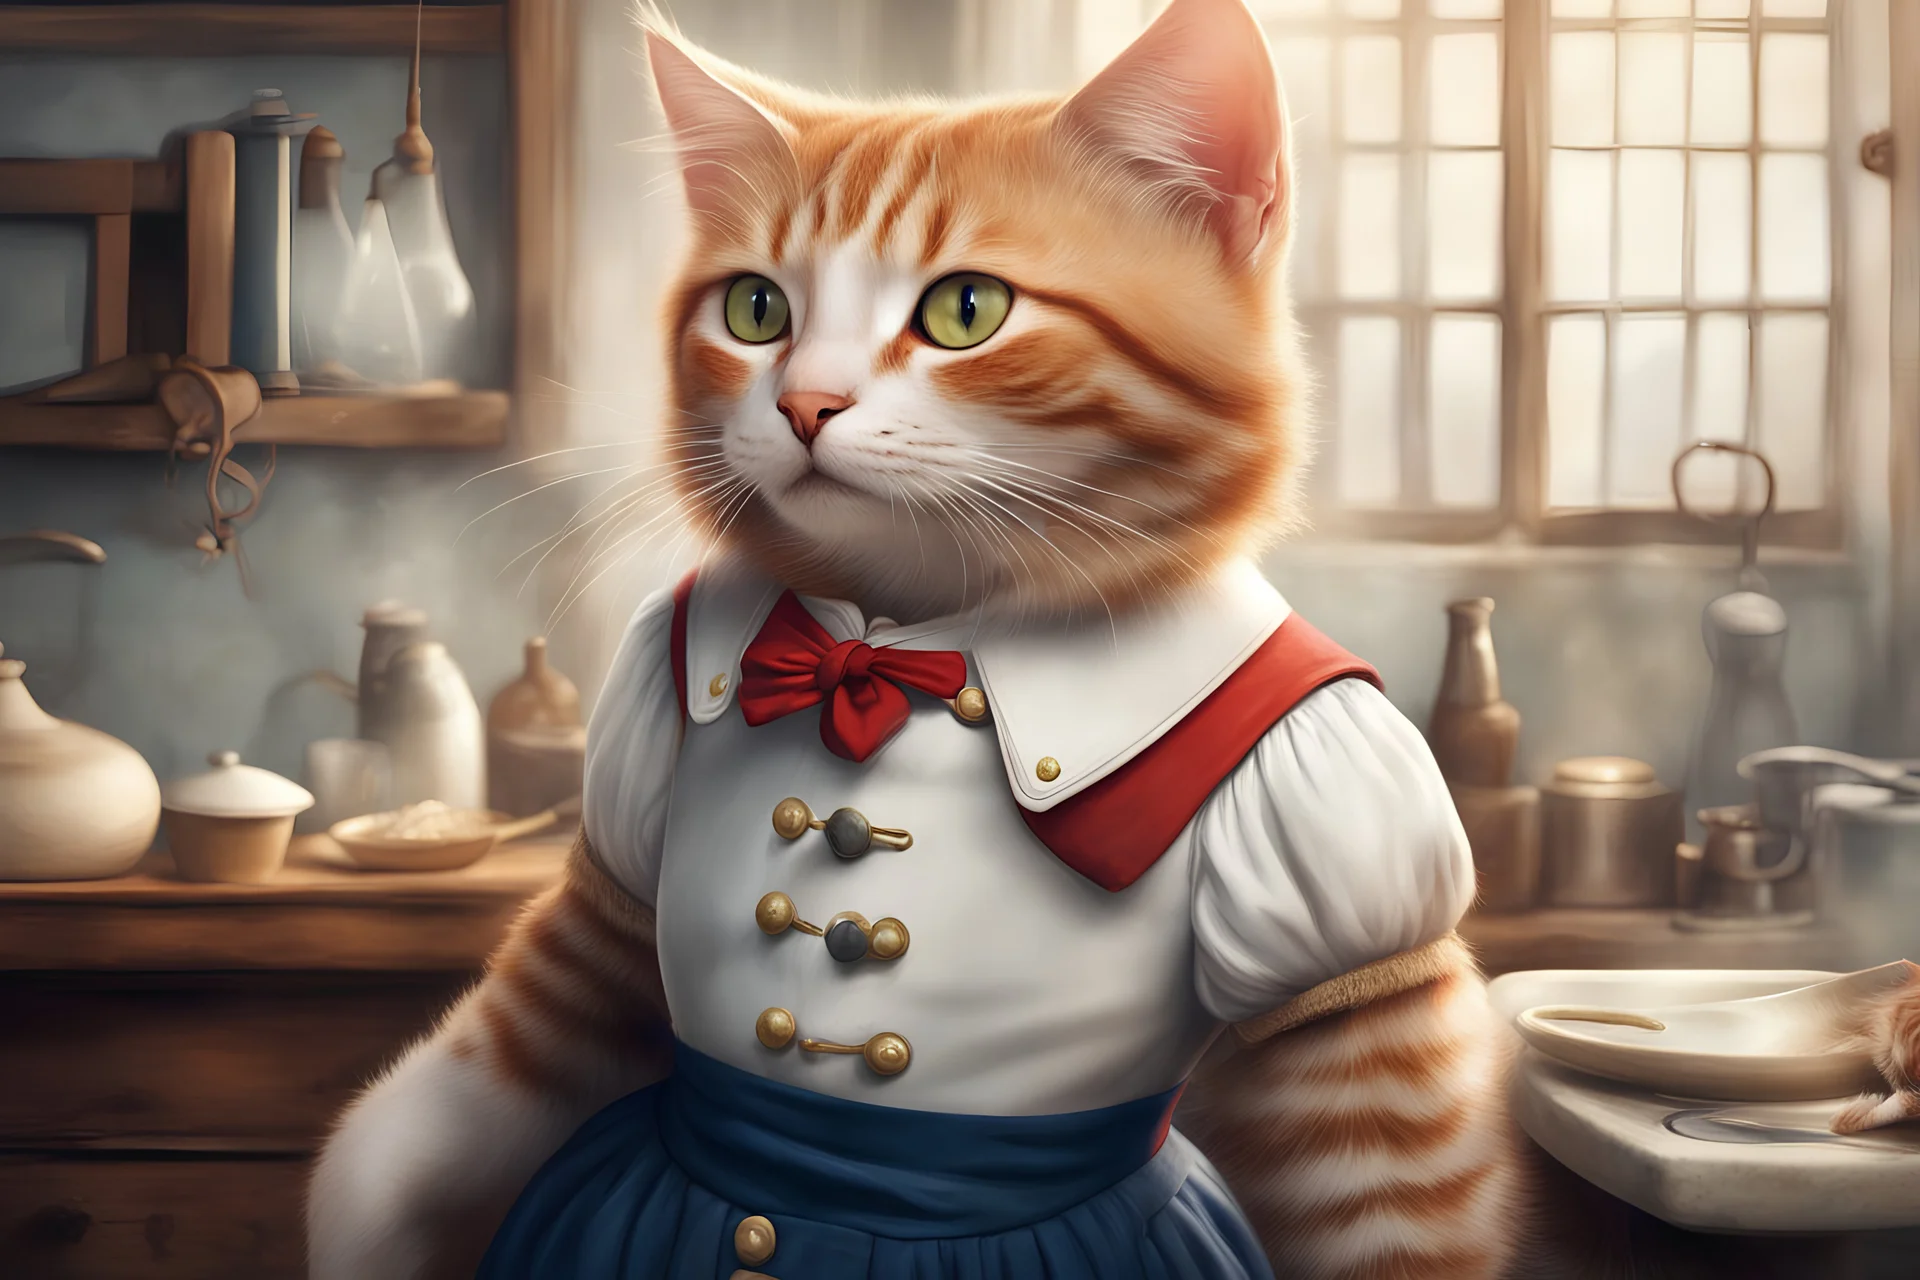 The sailor did not look like reality: it was made as if to order, according to a trembling feline invention stored somewhere deep in the heart. Leopold has long dreamed that someone other than mice would appear in his life. For example, a kind, red-haired kitty who loves to cook and sing. She's smart enough to stand up for herself, but not smart enough to hurt anyone. And life gave him a Sailor. Even if he wasn't a cat, he wasn't even a woman, but he really turned out to be extremely kind. For s